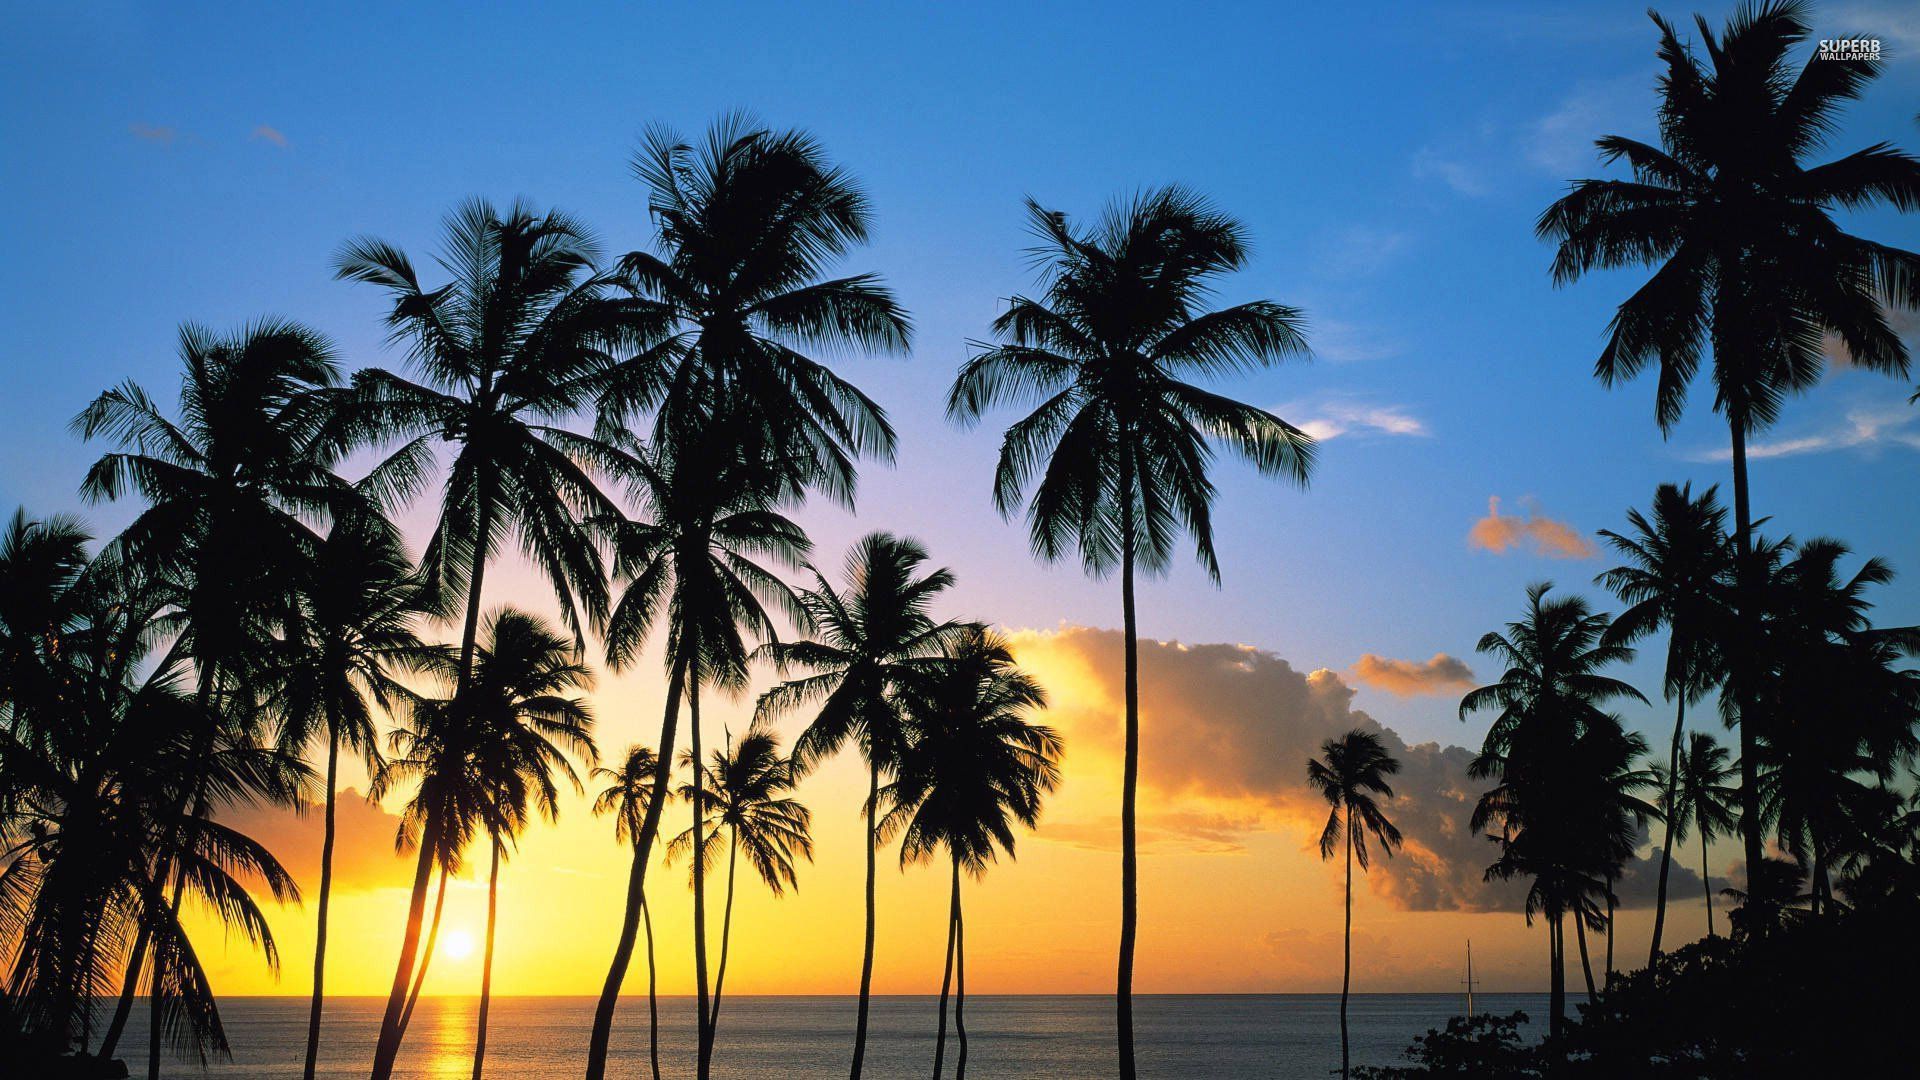 Palm tree silhouettes in the sunset wallpaper - Beach wallpapers ...